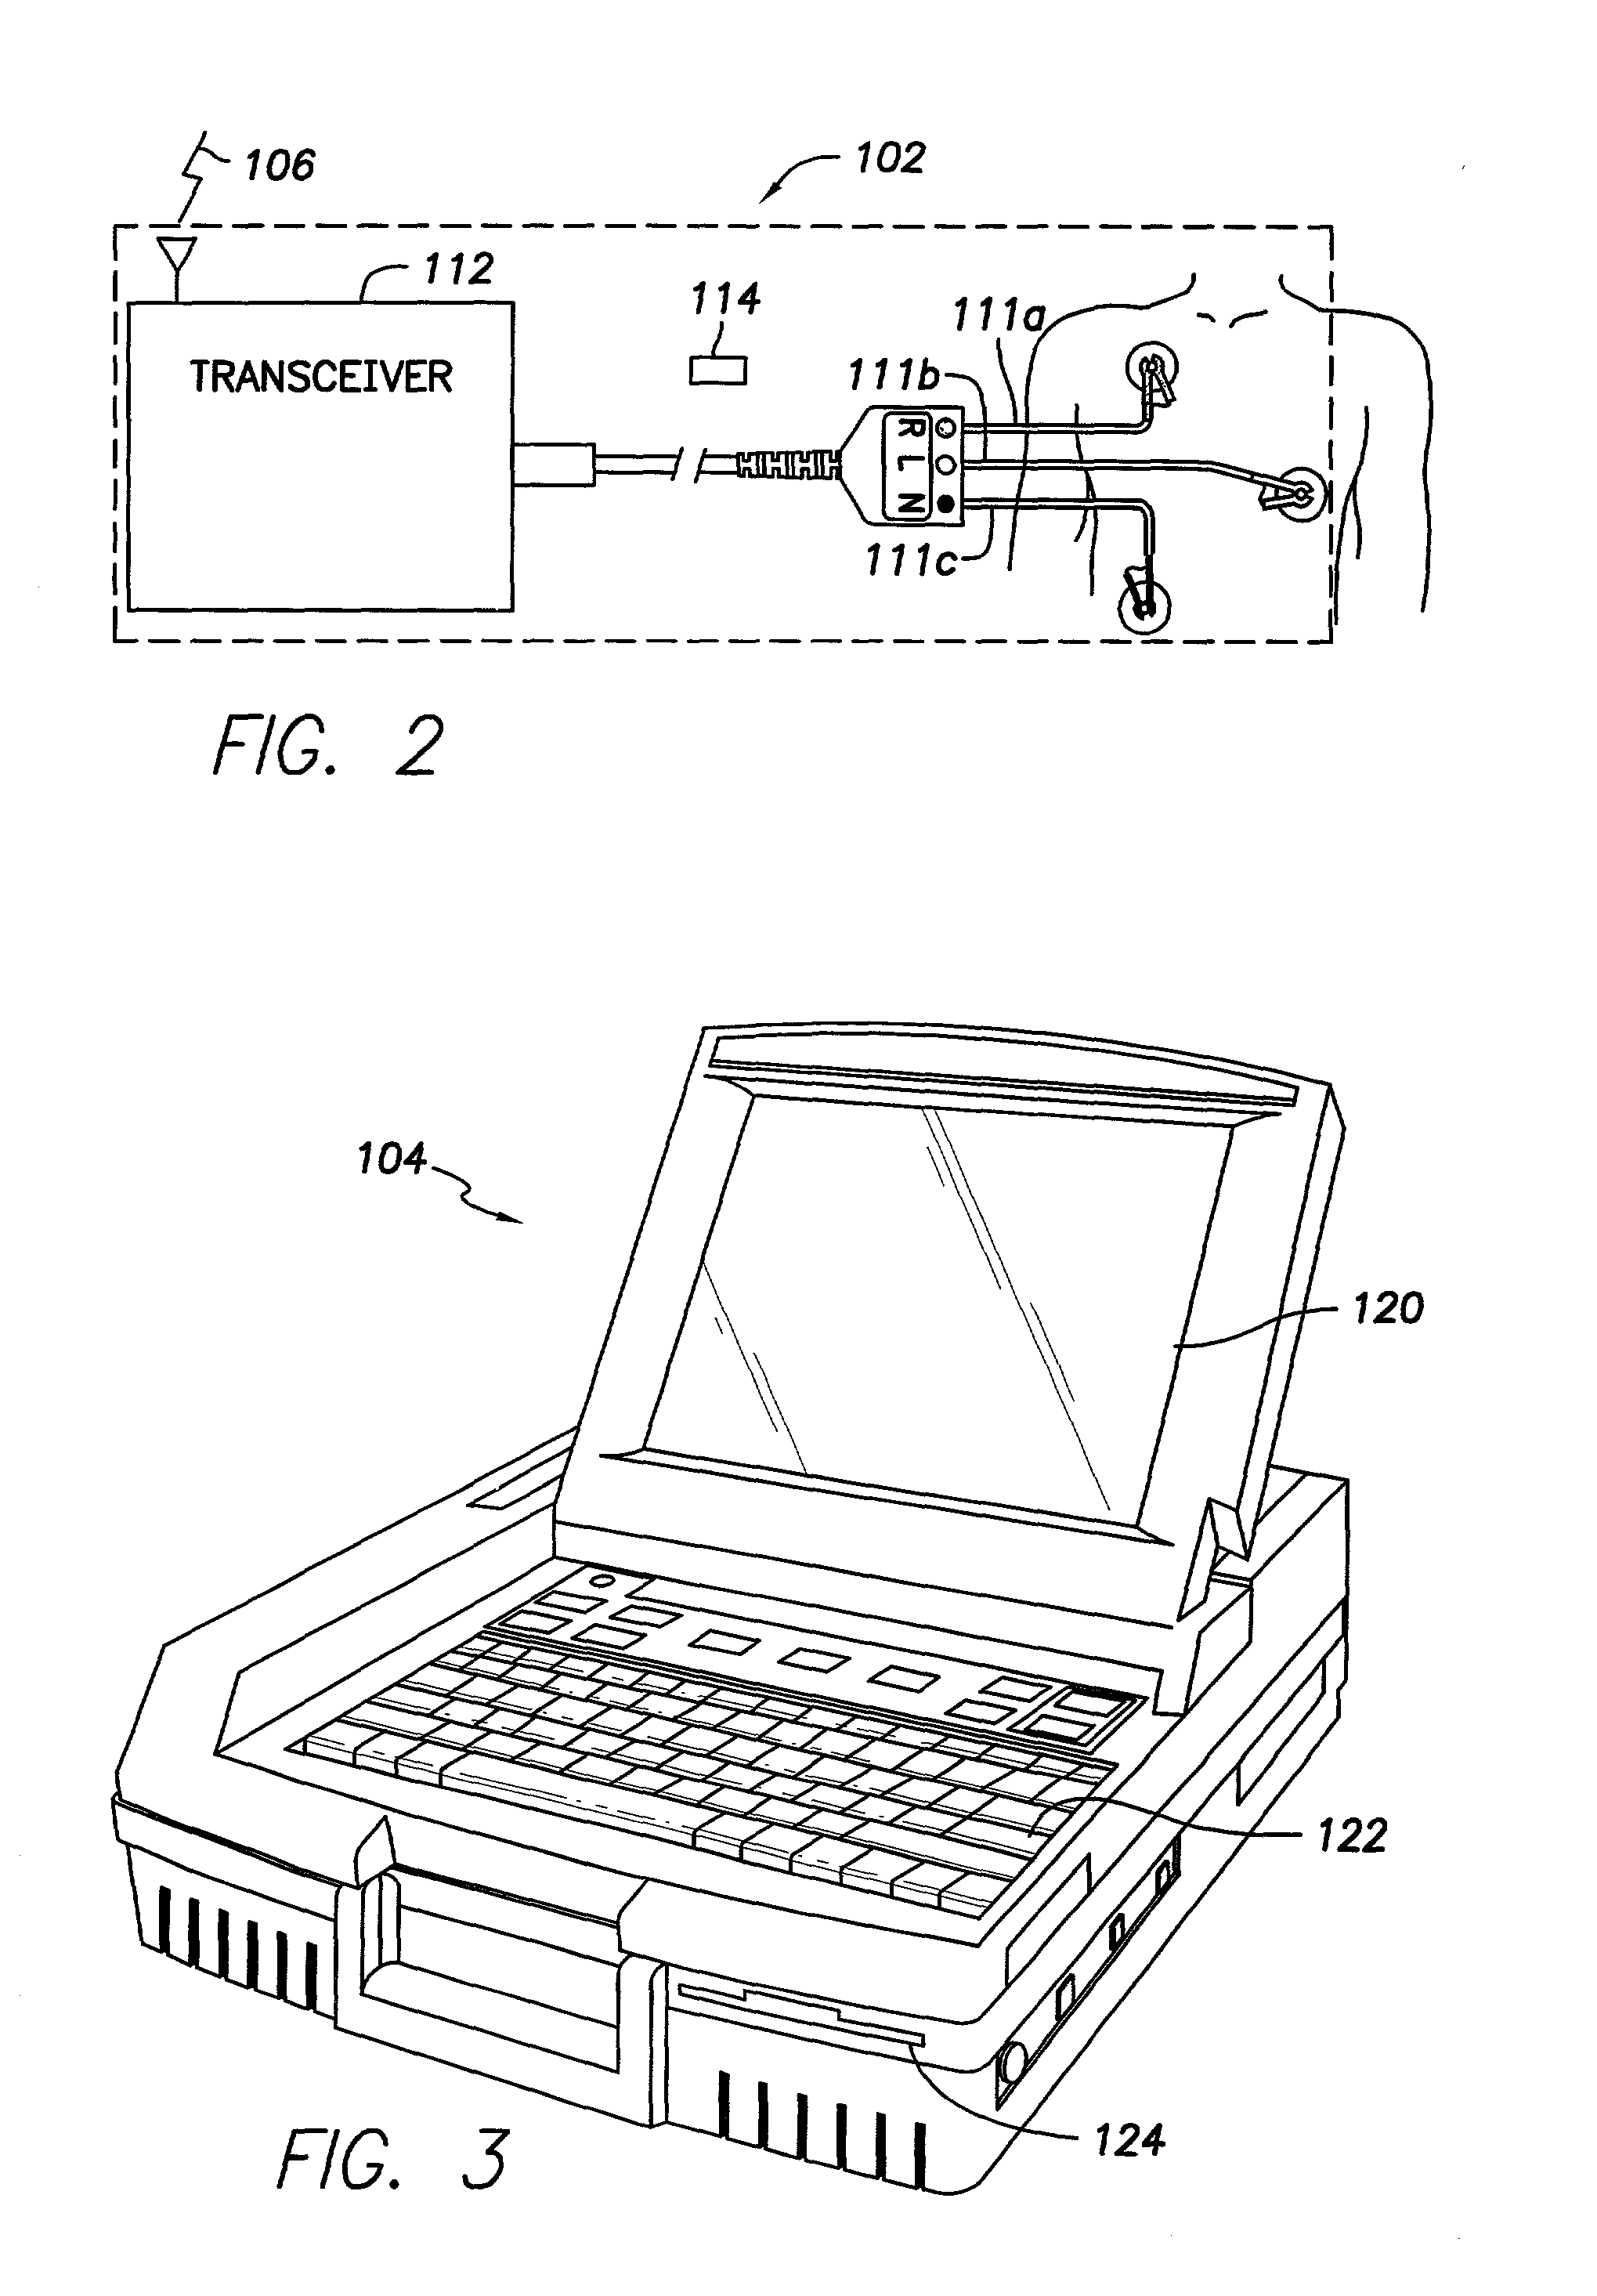 Programmer and surface ECG system with wireless communication